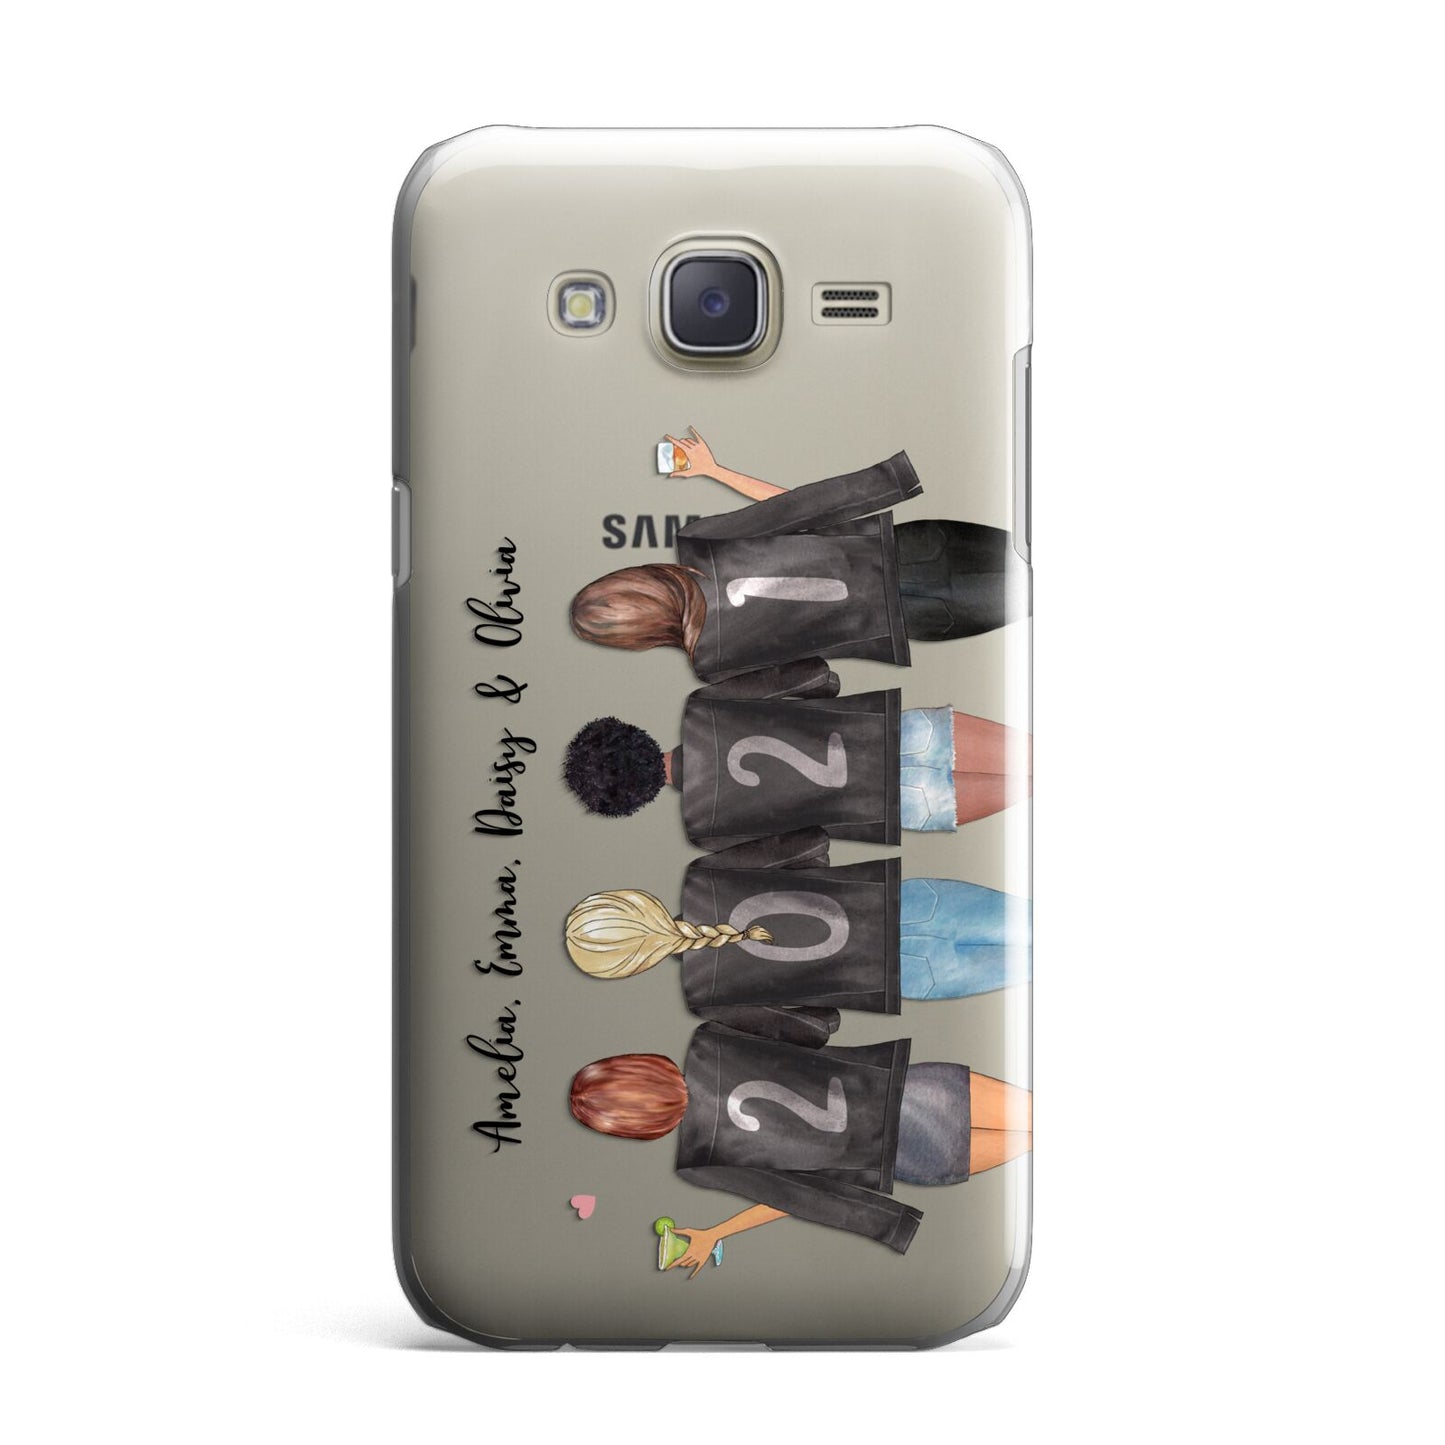 4 Best Friends with Names Samsung Galaxy J7 Case